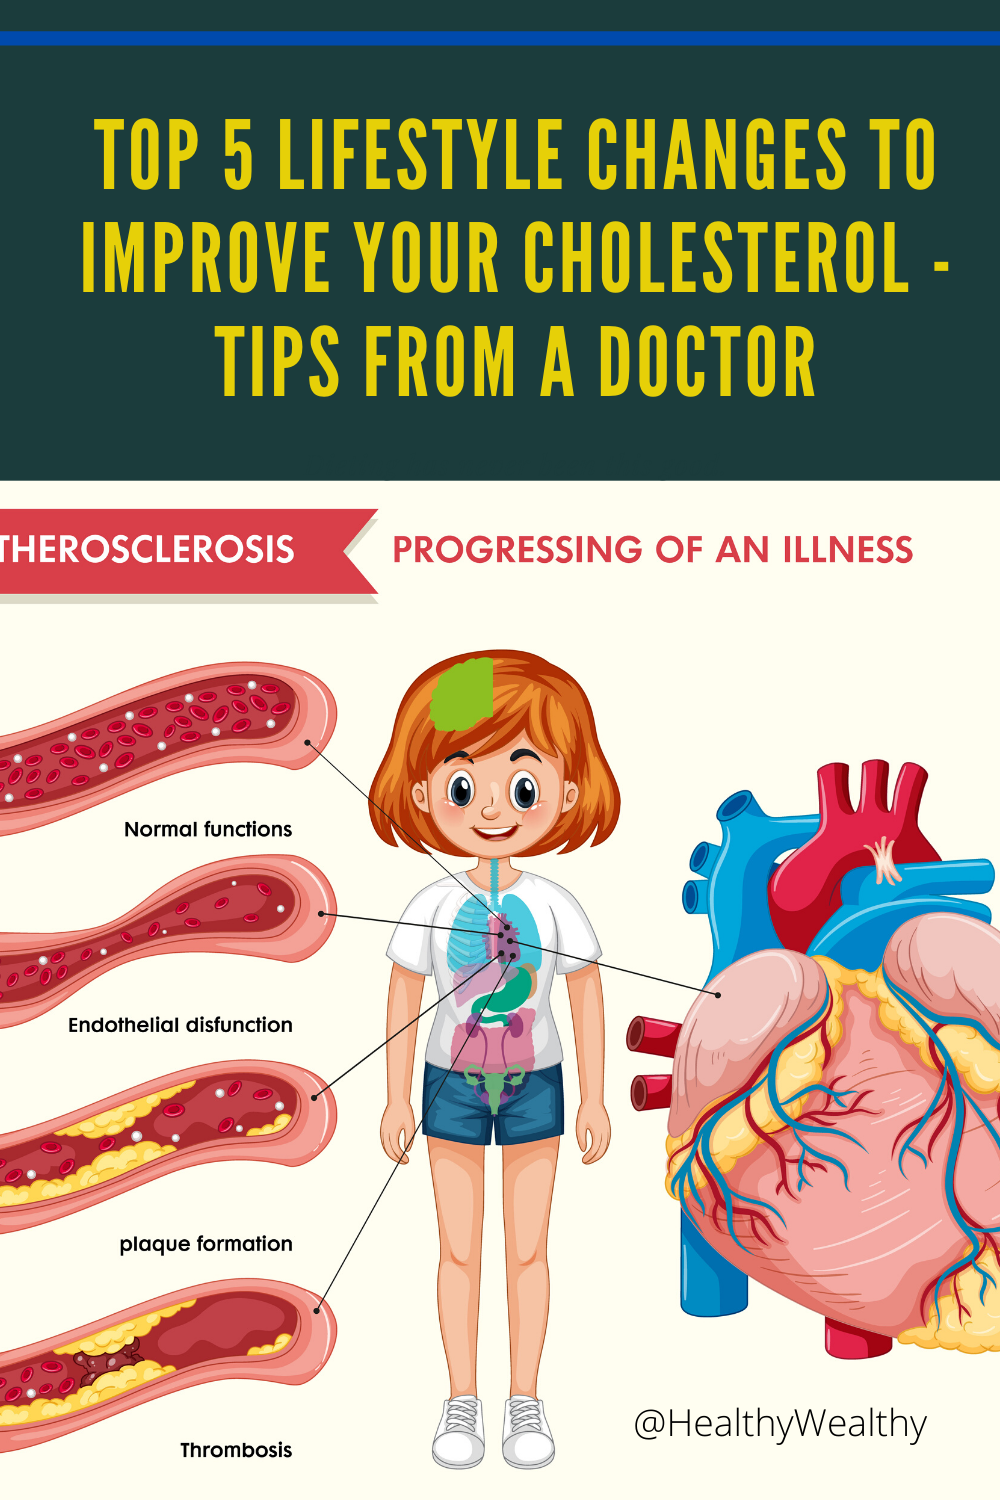 Top 5 lifestyle changes to improve your cholesterol